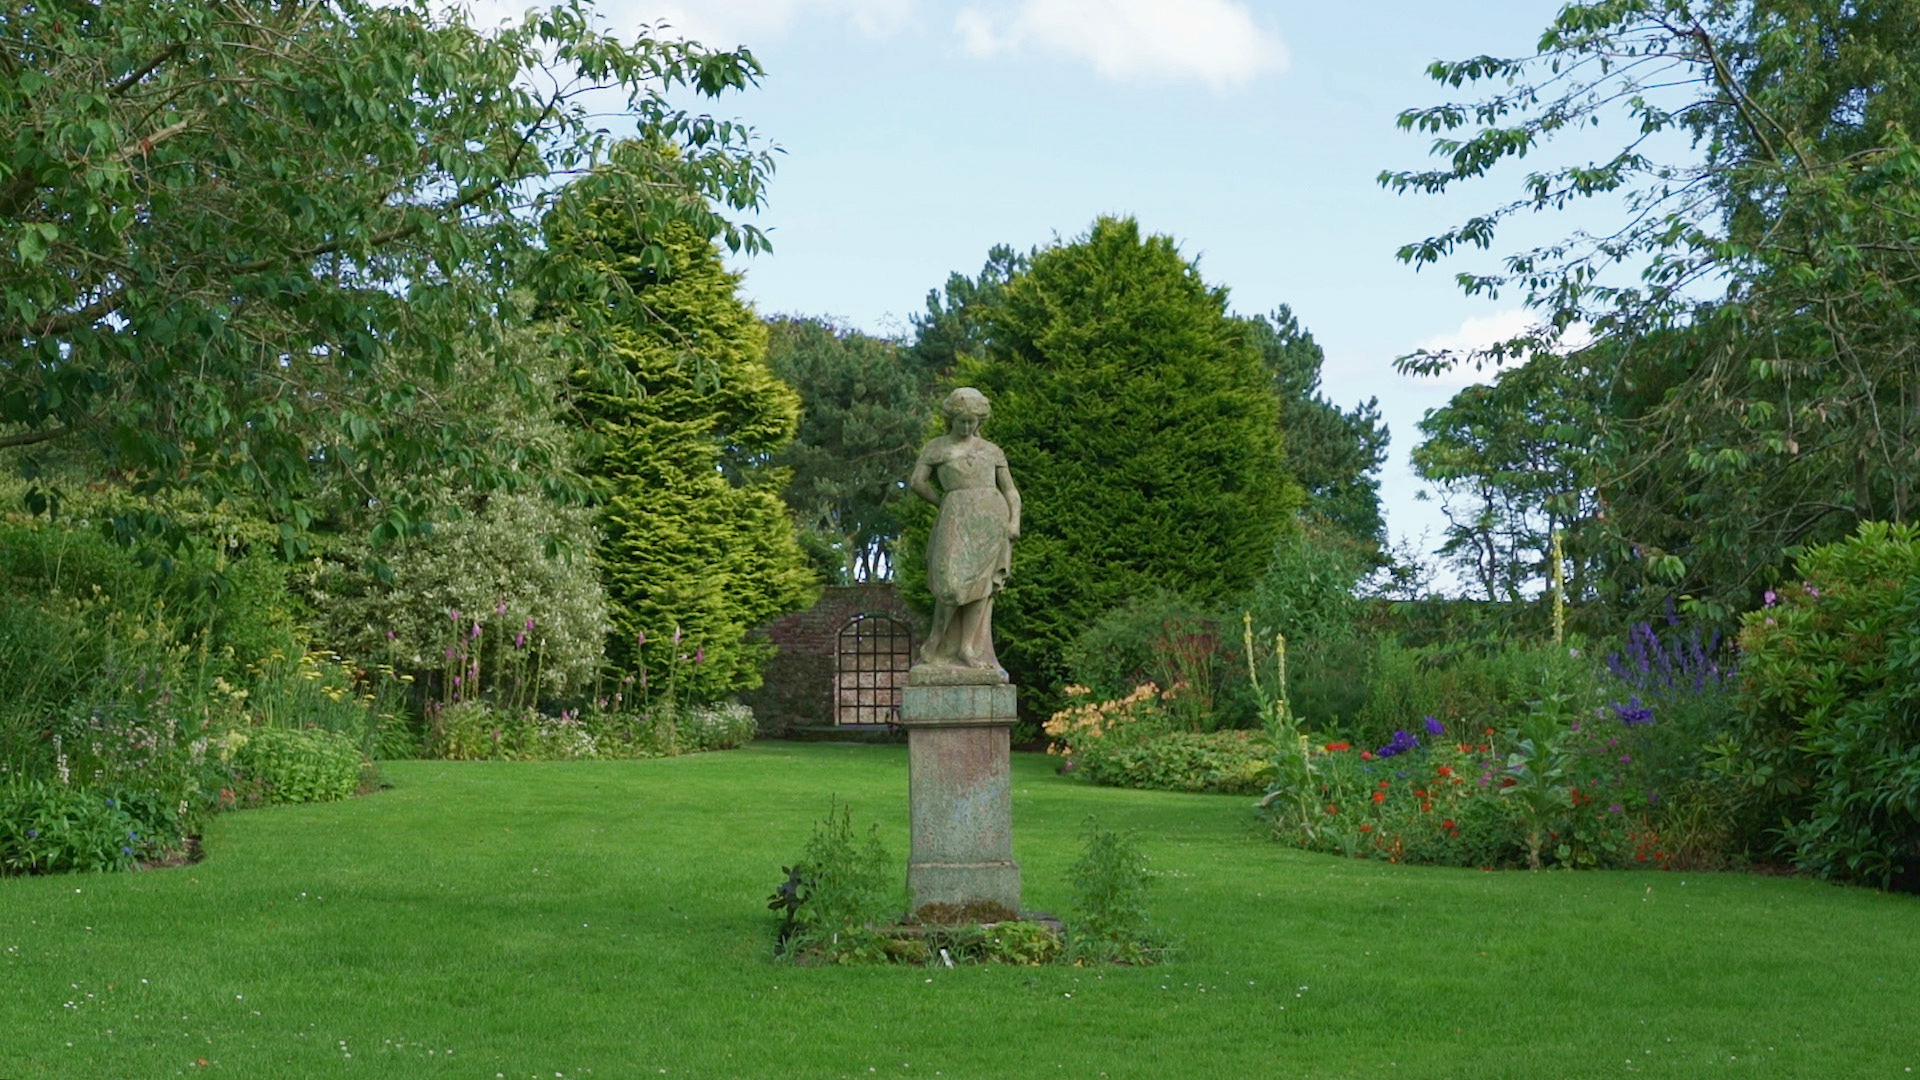 A beautifully cultivated garden. At the centre is a statue of a woman on a podium.